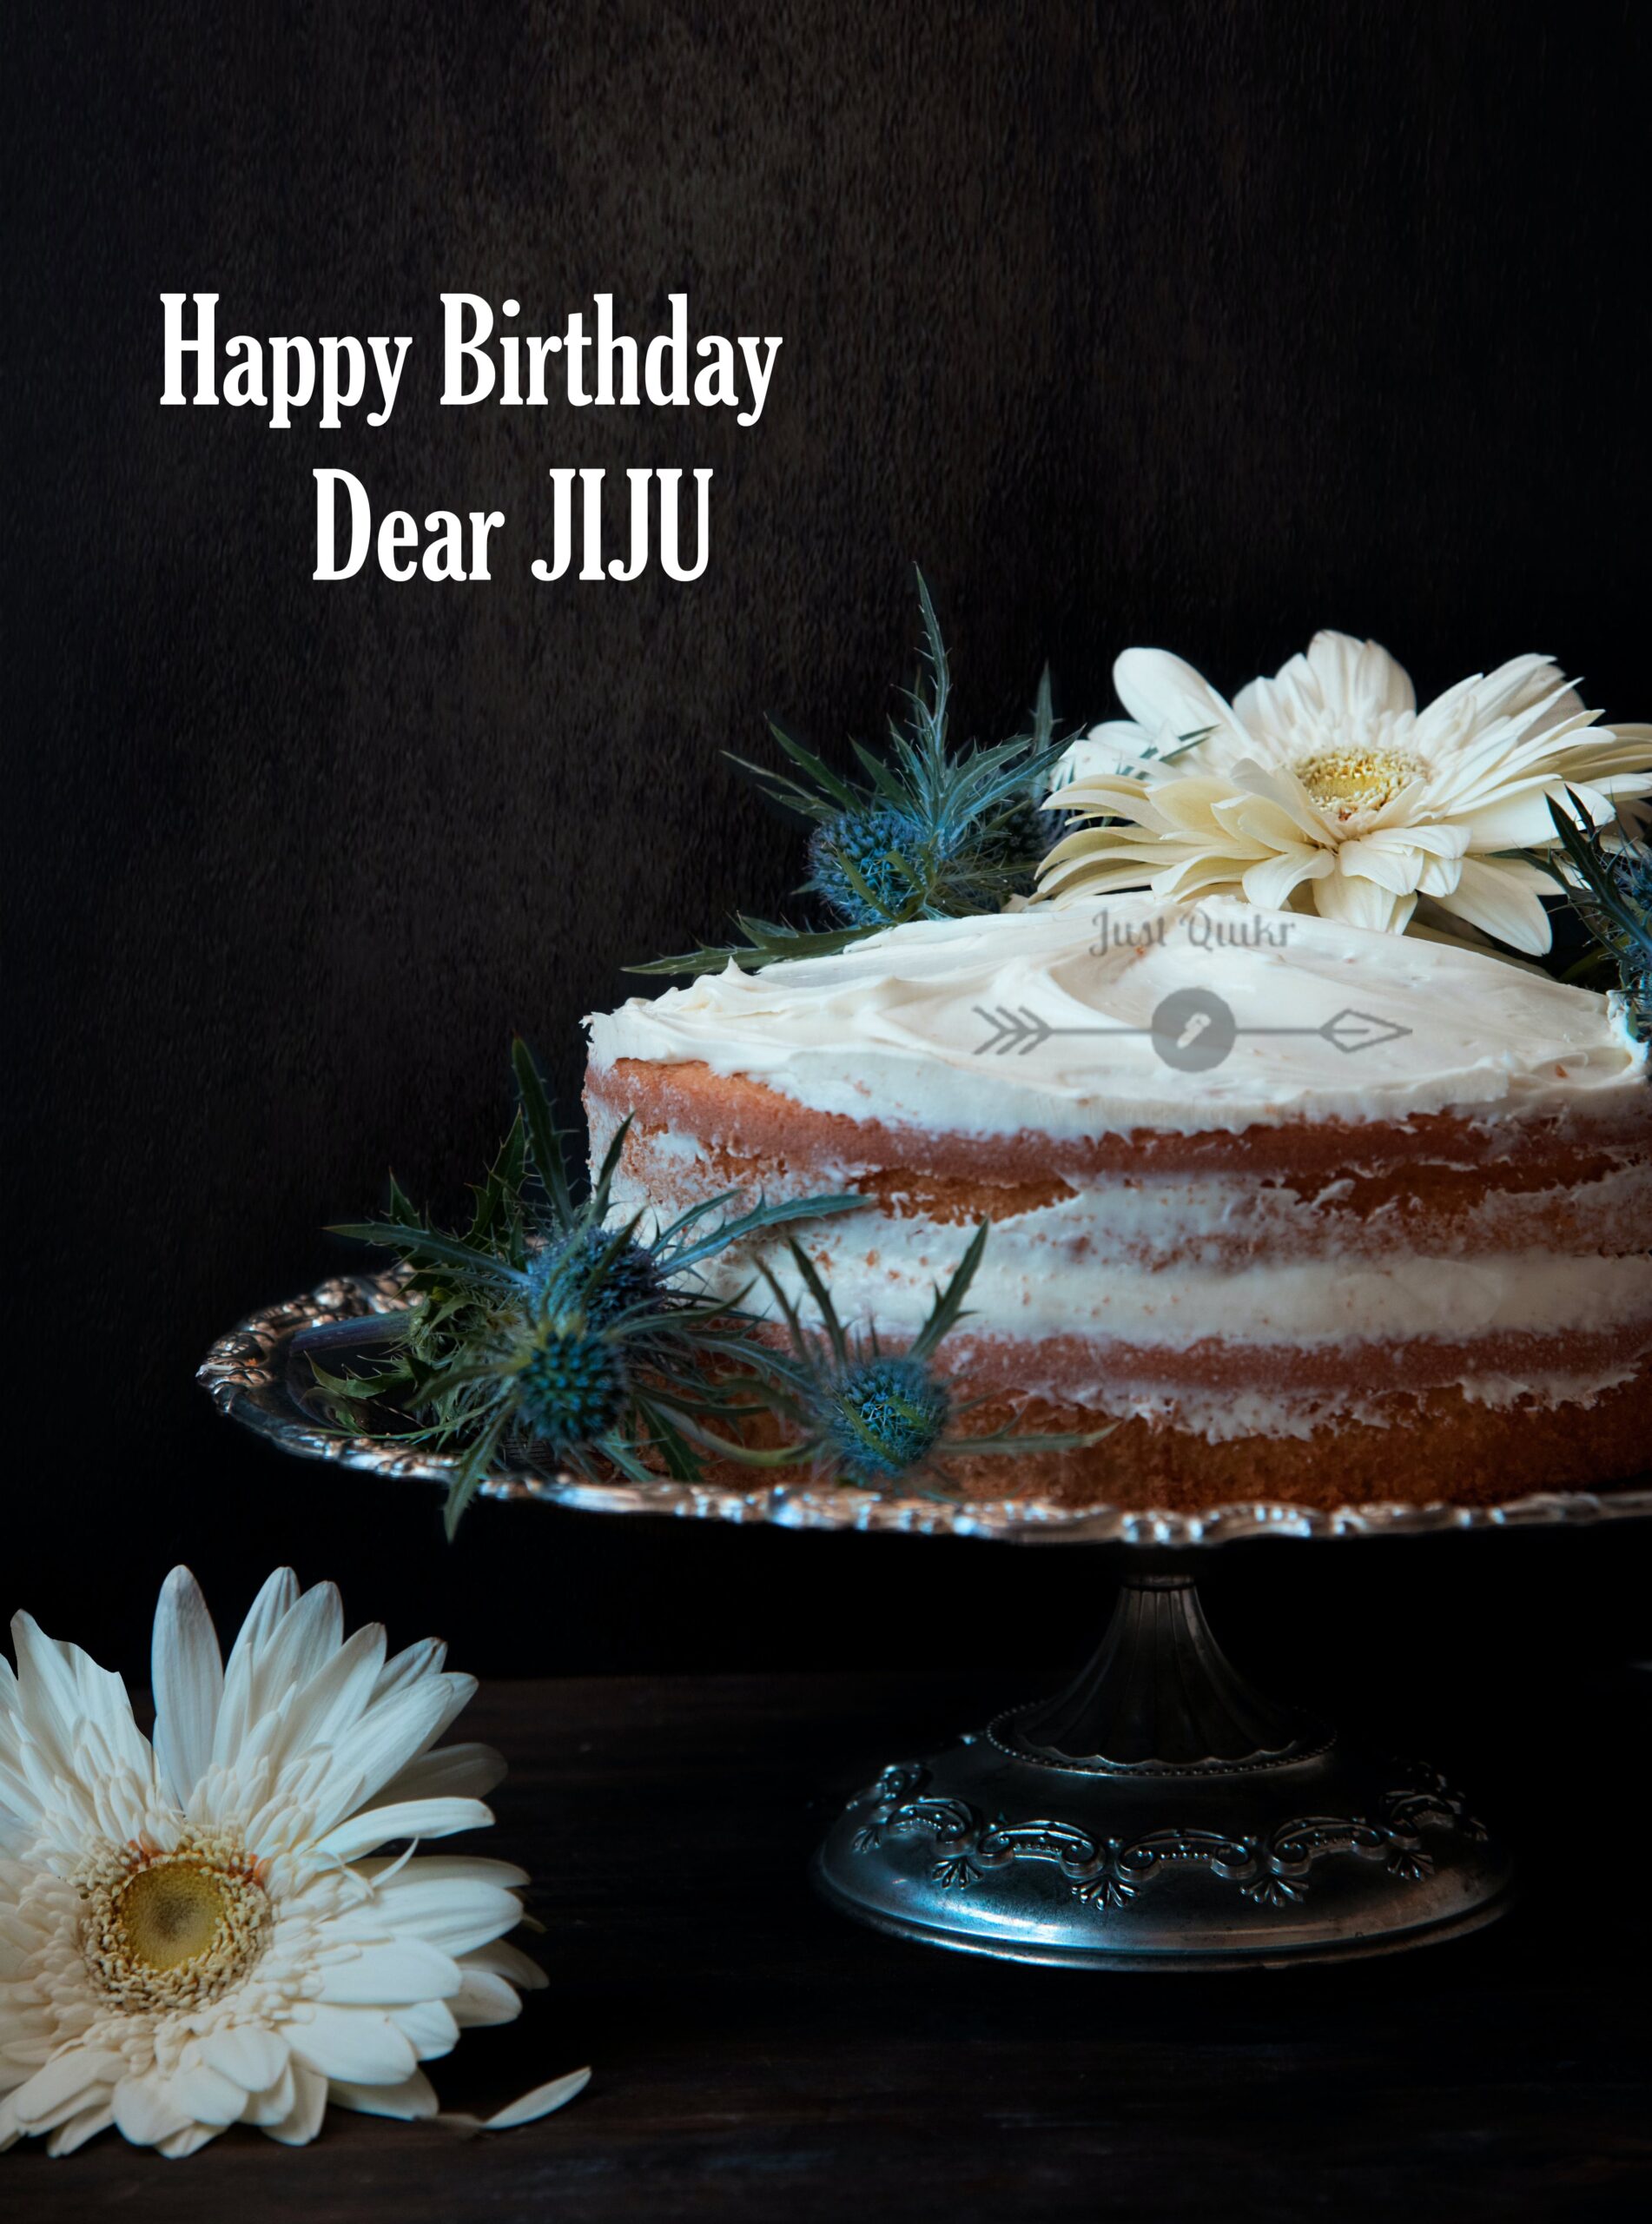 Special Unique Happy Birthday Cake HD Pics Images for Jiju